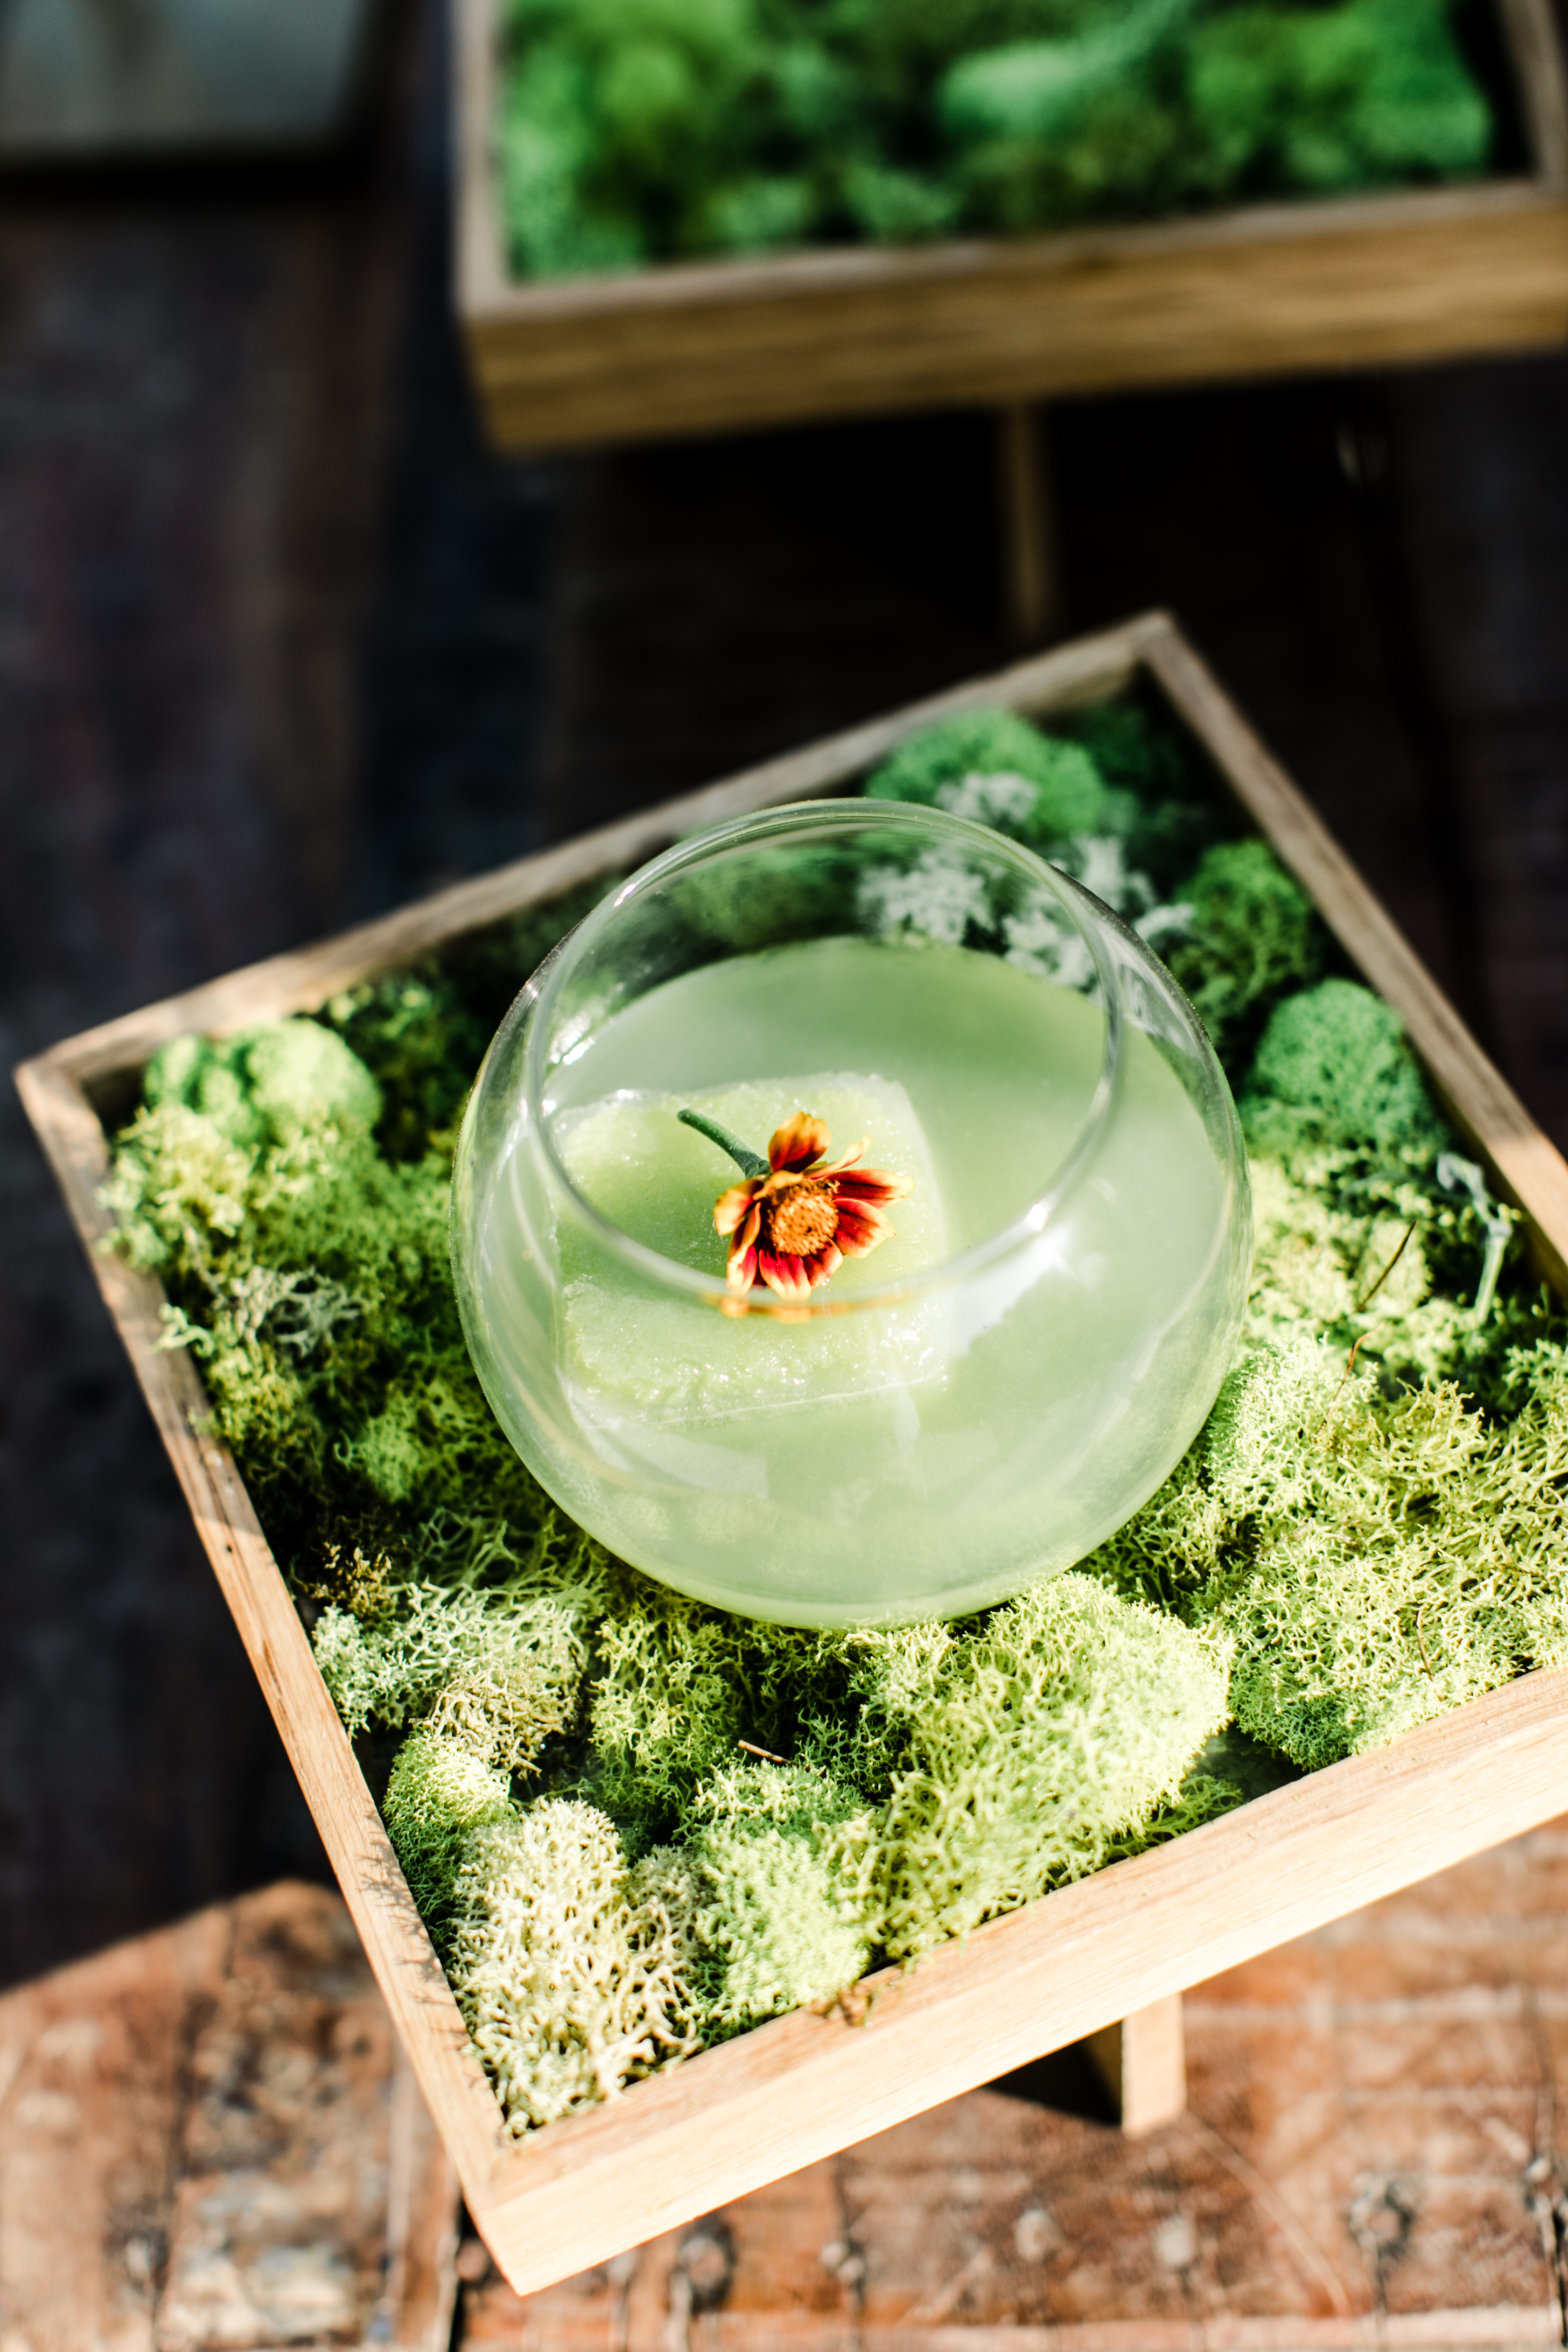 Falling Through the Fields by Natalie Newberry with Castle & Key Gin won last year's Cocktail Competition.